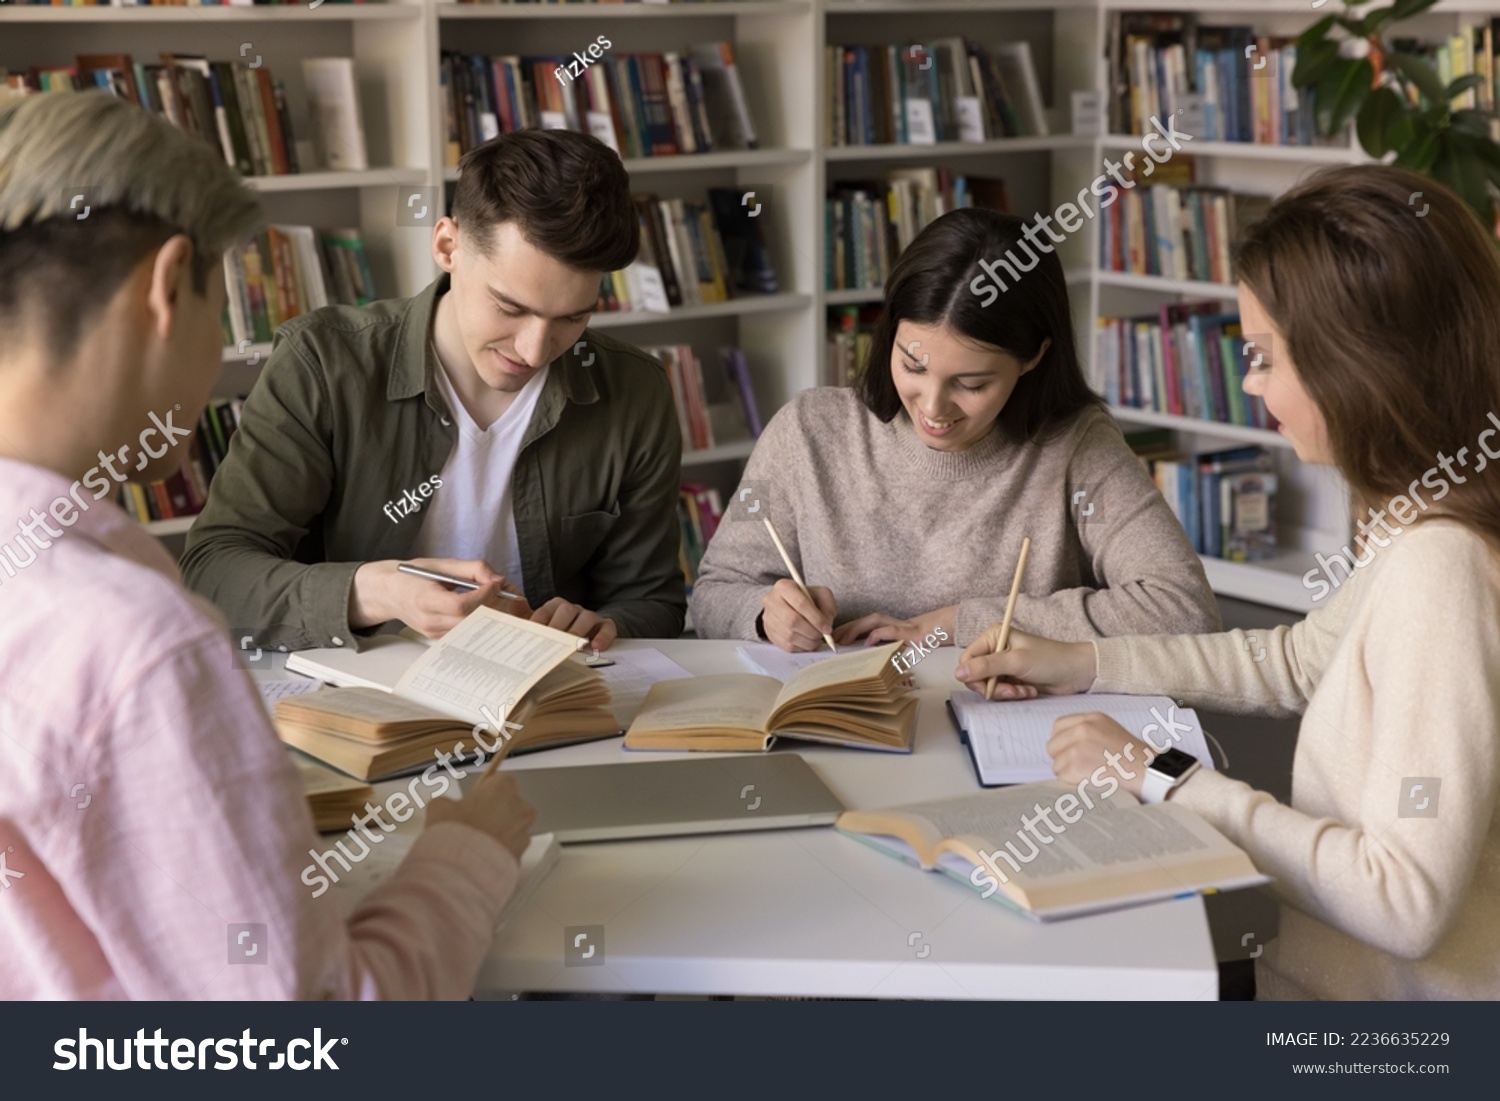 Group of positive young hardworking smart students studying in library, sitting together at open books, writing notes, essay, talking, working on team task, research, preparing report #2236635229